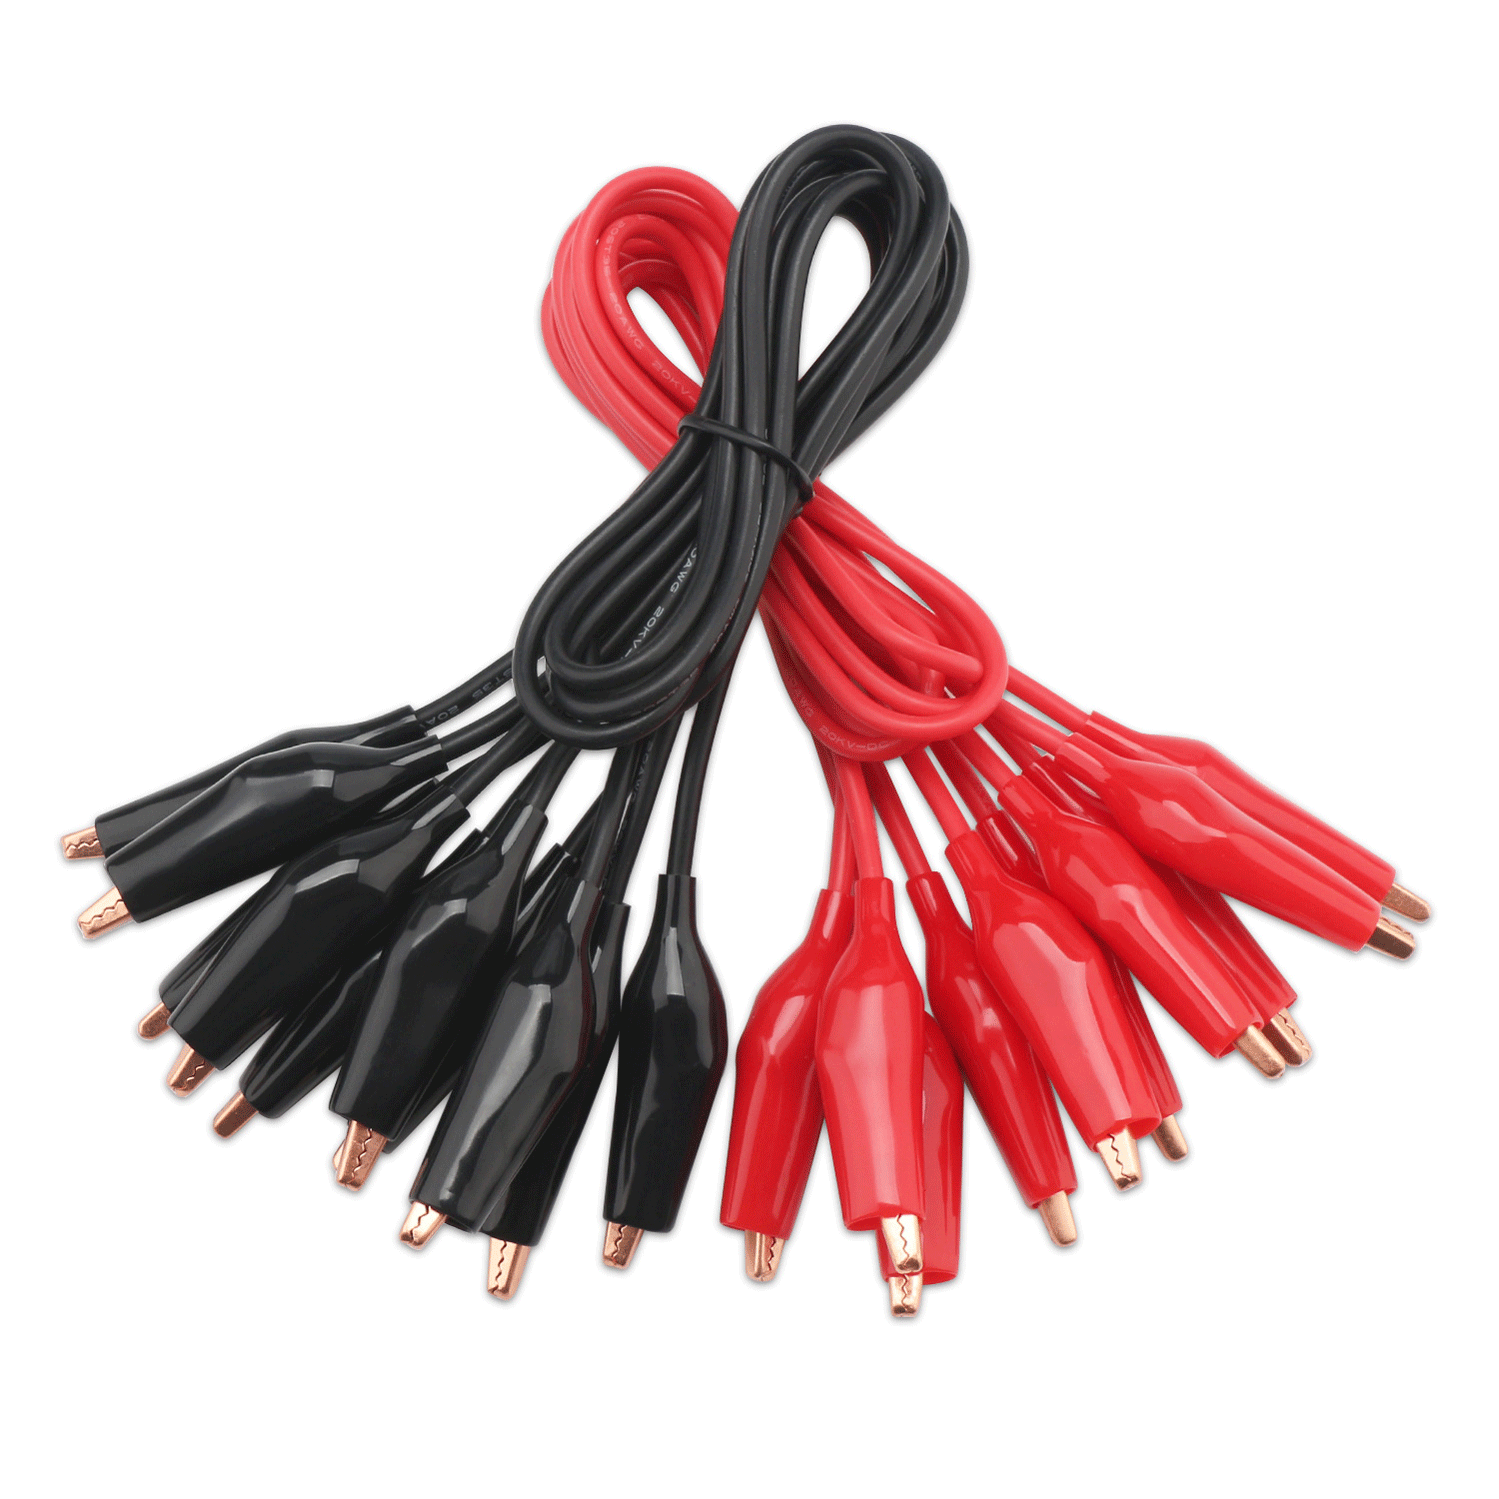 10 PCS/LOT Alligator Clips Electrical Cable Leads Double-ended Crocodile Roach Clip DIY Test Leads/Jumper Wire